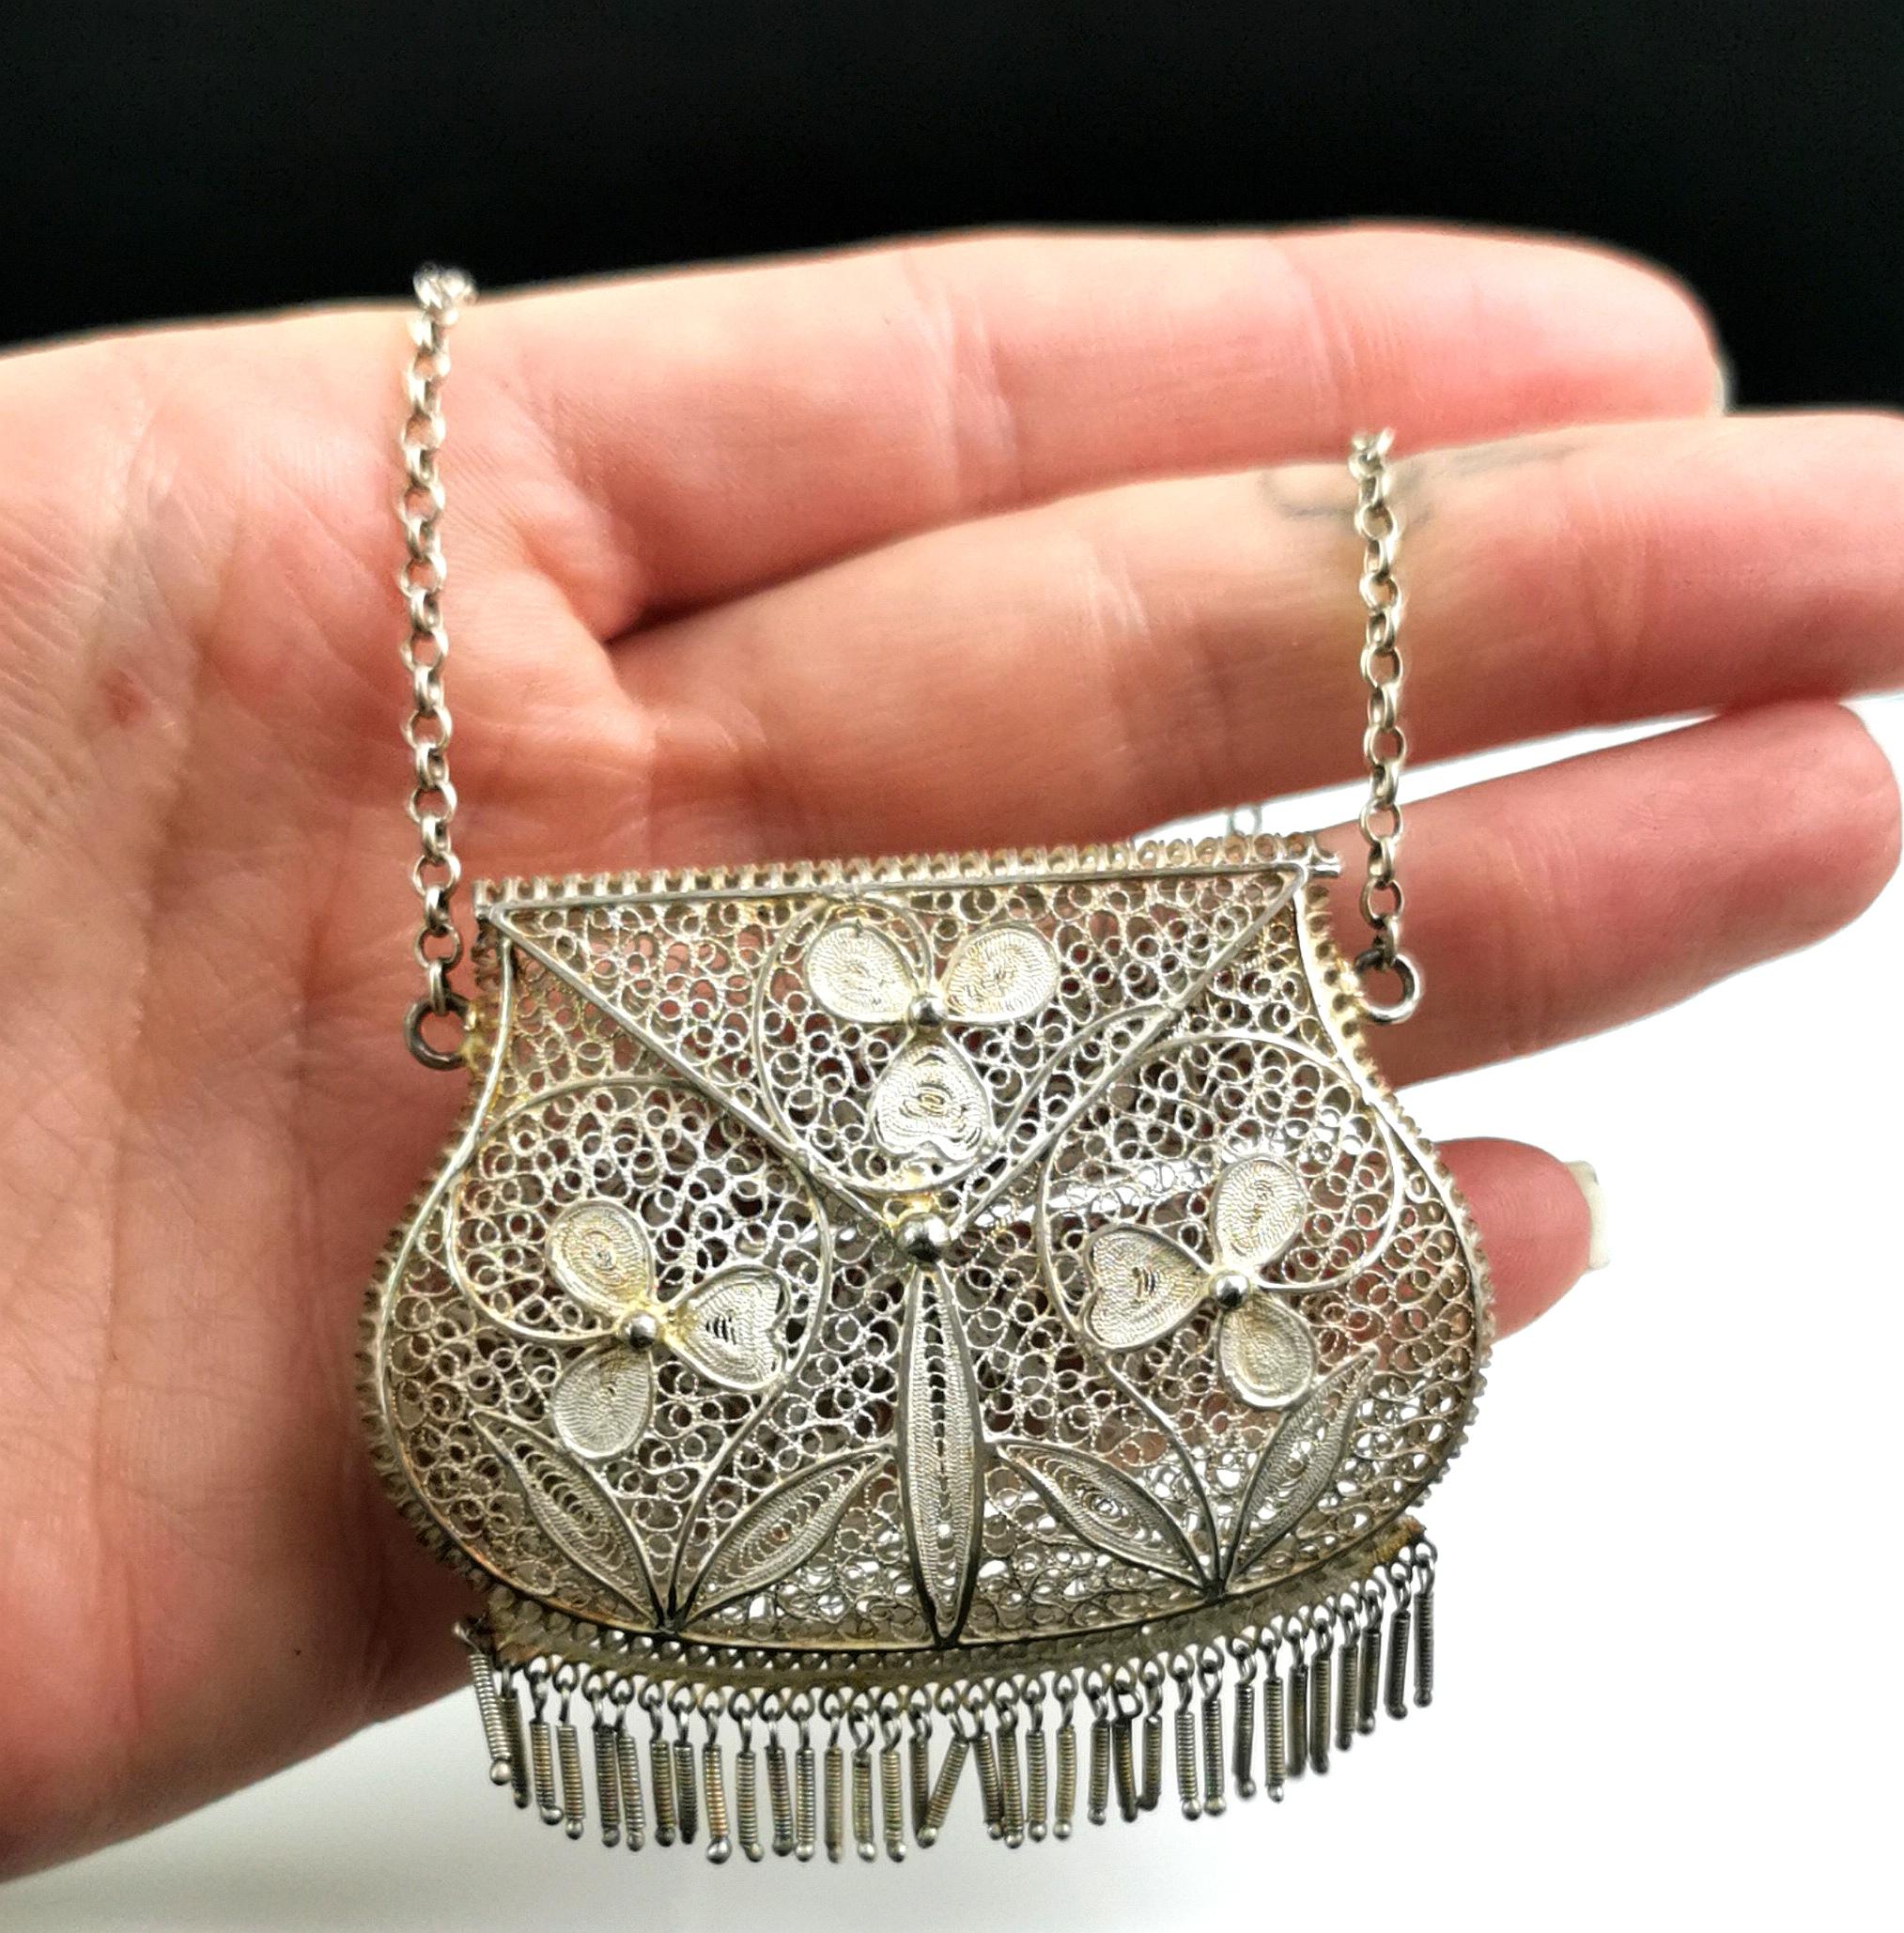 A stunning vintage Art Deco era silver evening purse.

The body is made up from intricately woven 925 sterling silver in a fascinating and eye catching filigree design.

The purse has a silver chain handle and snaps shut at the front.

It has a